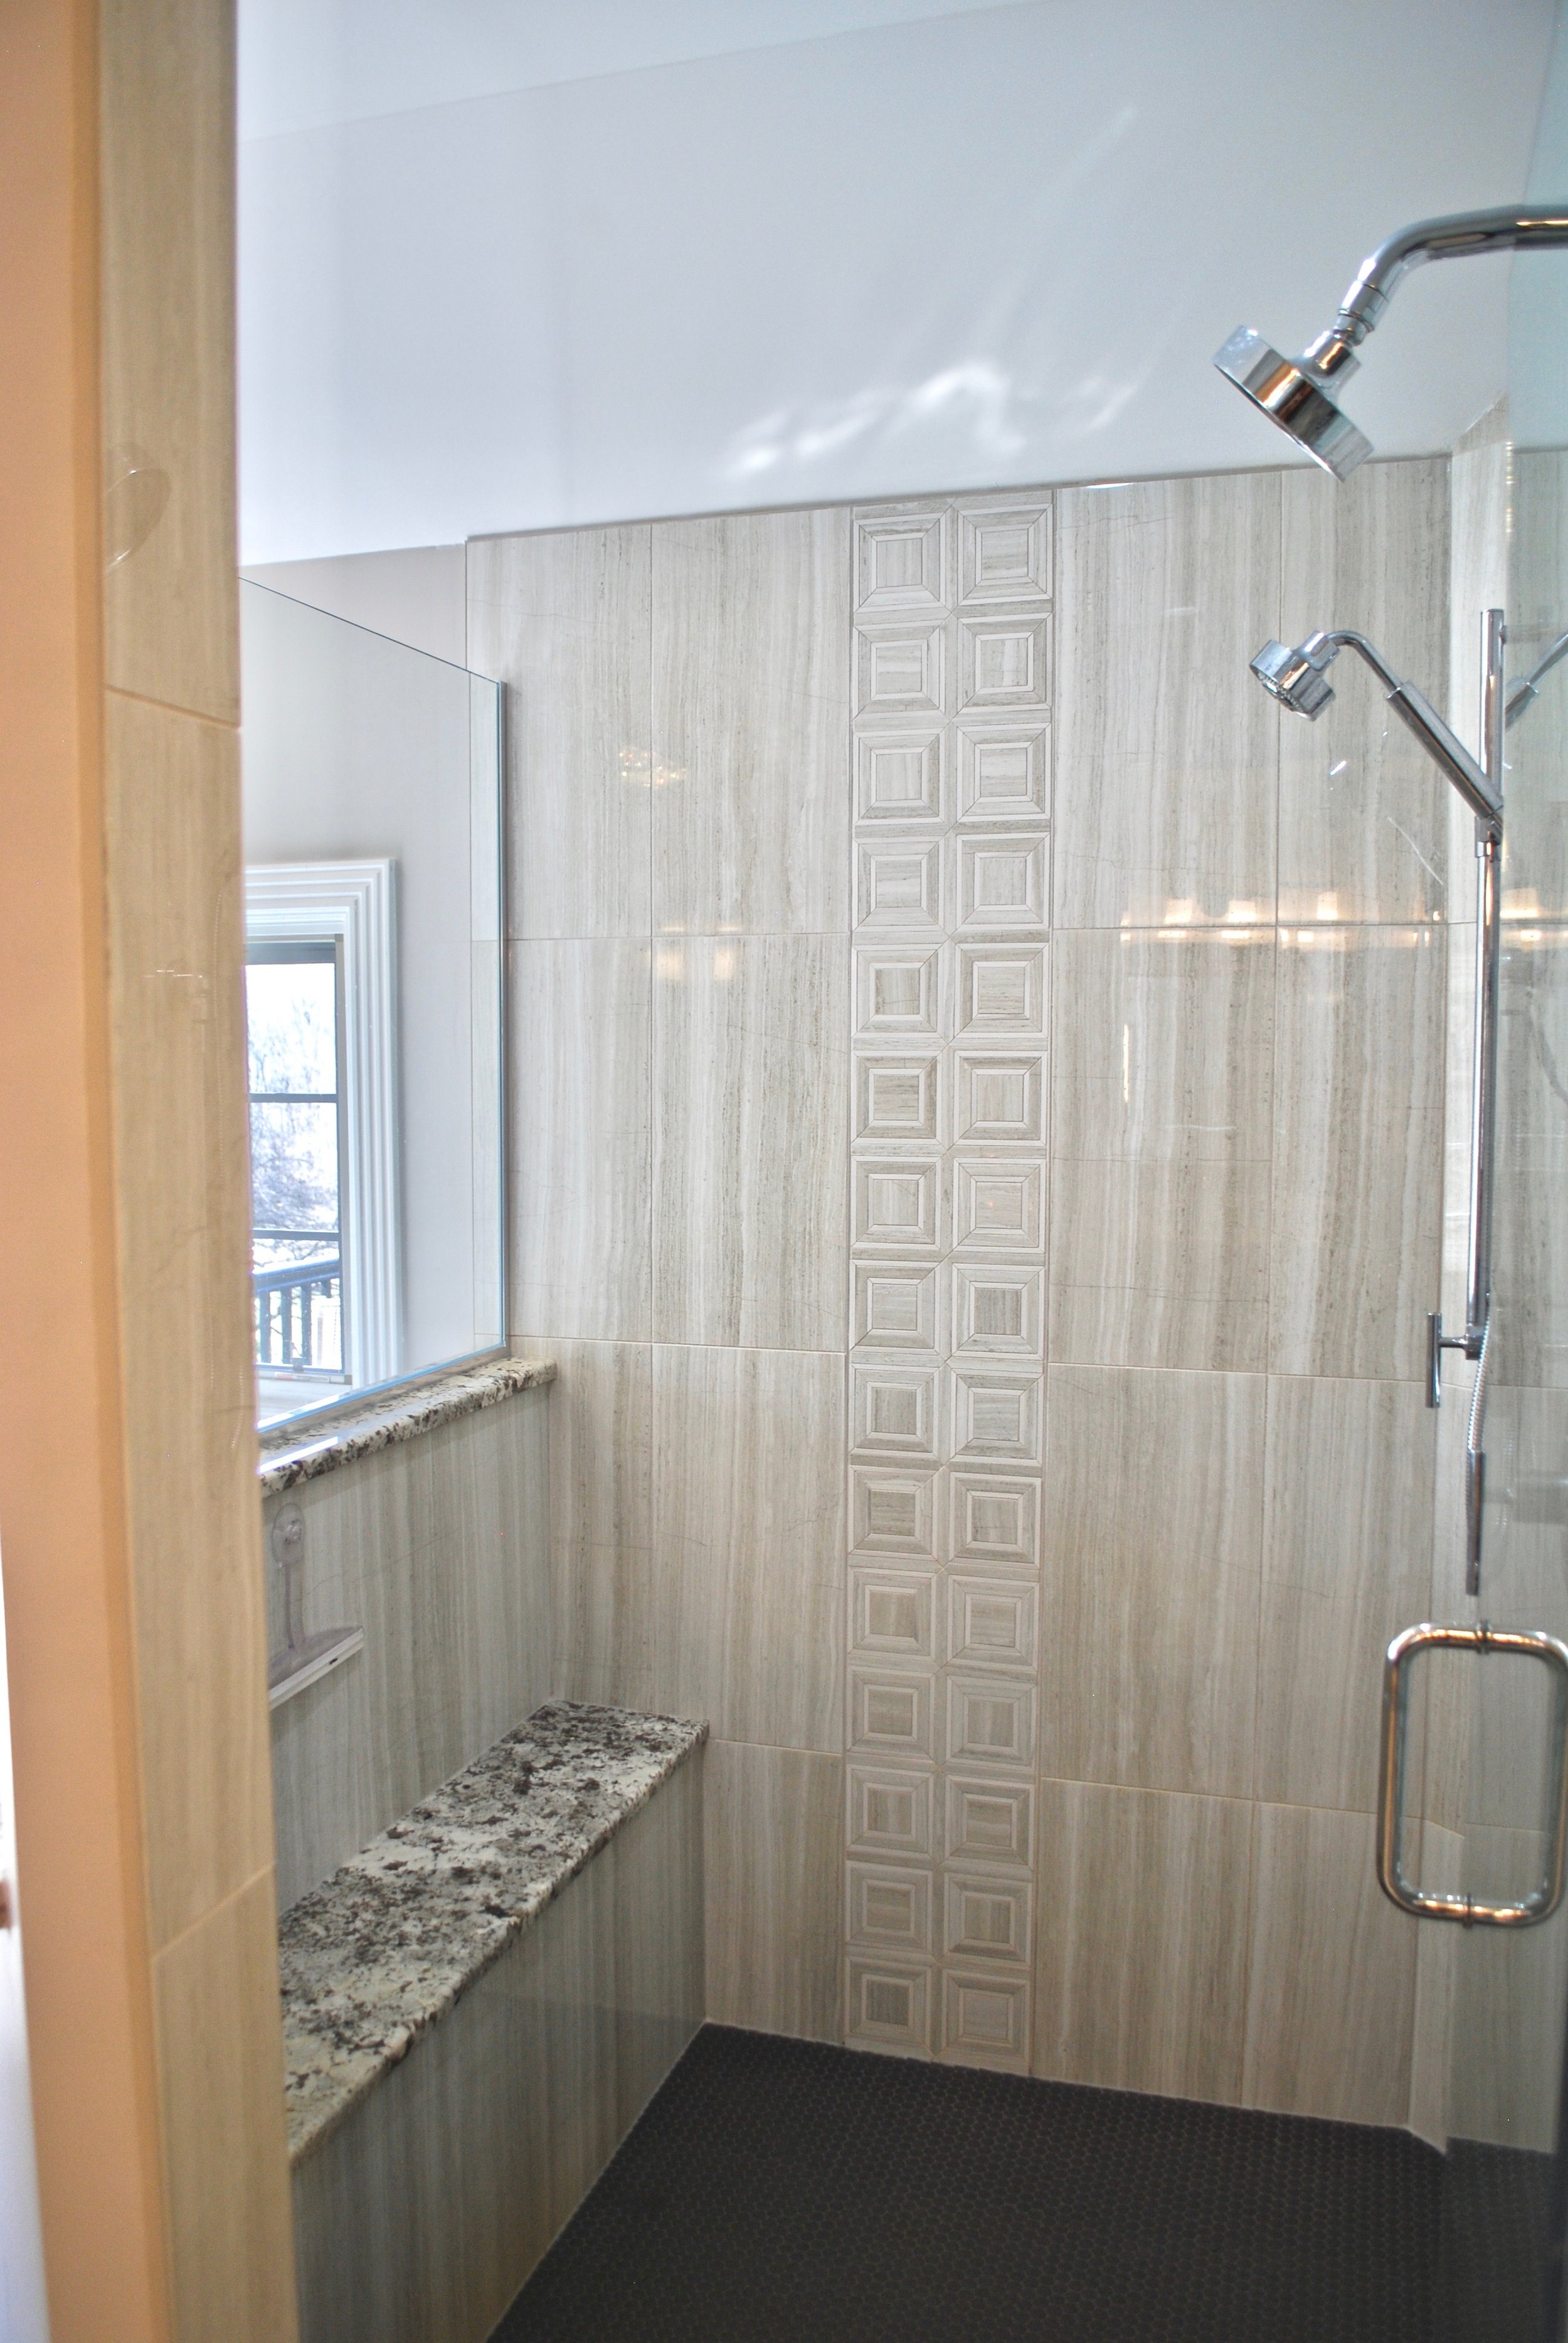 LARGE WALK IN SHOWER WITH BATHROOM RENOVATIONS IN THIS NAPERVILLE IL CUSTOM BATHROOM UPDATE